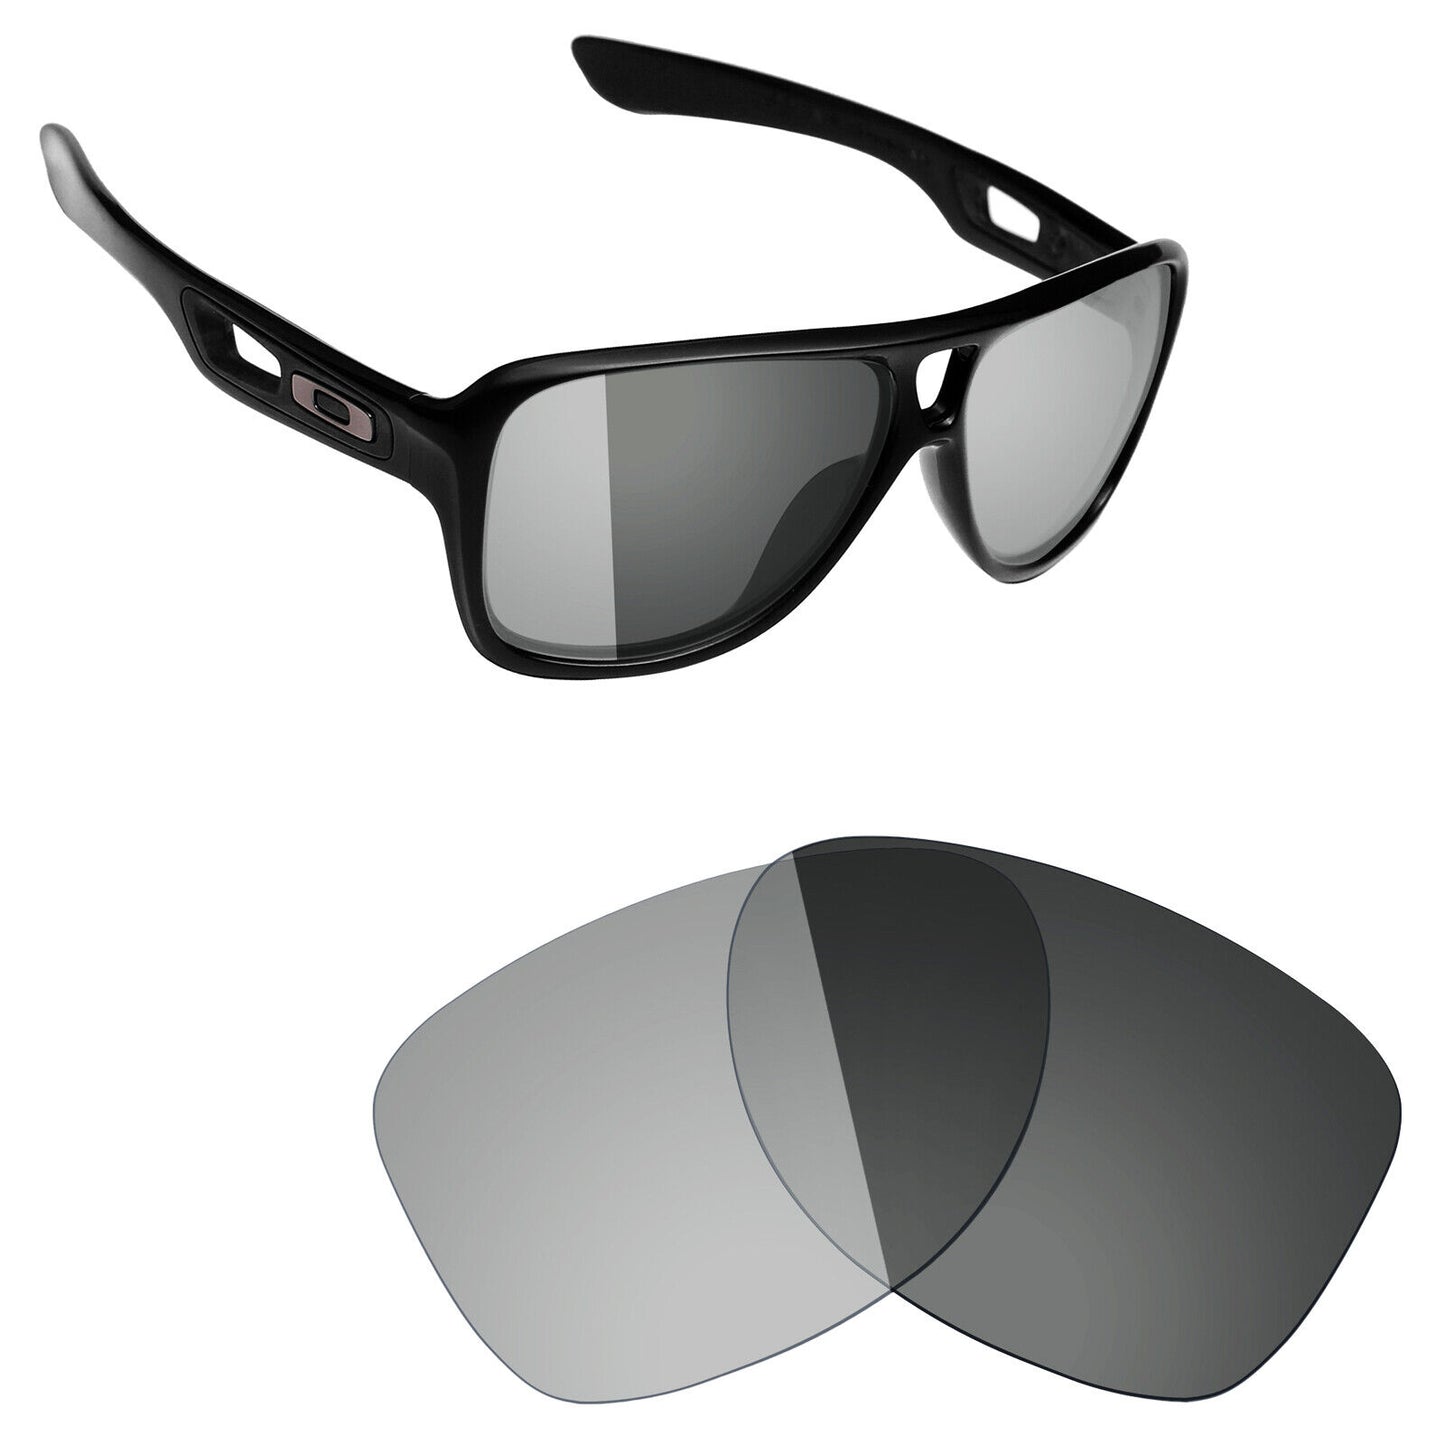 Hawkry Polarized Replacement Lenses for-Oakley Dispatch 2 Sunglass - Options